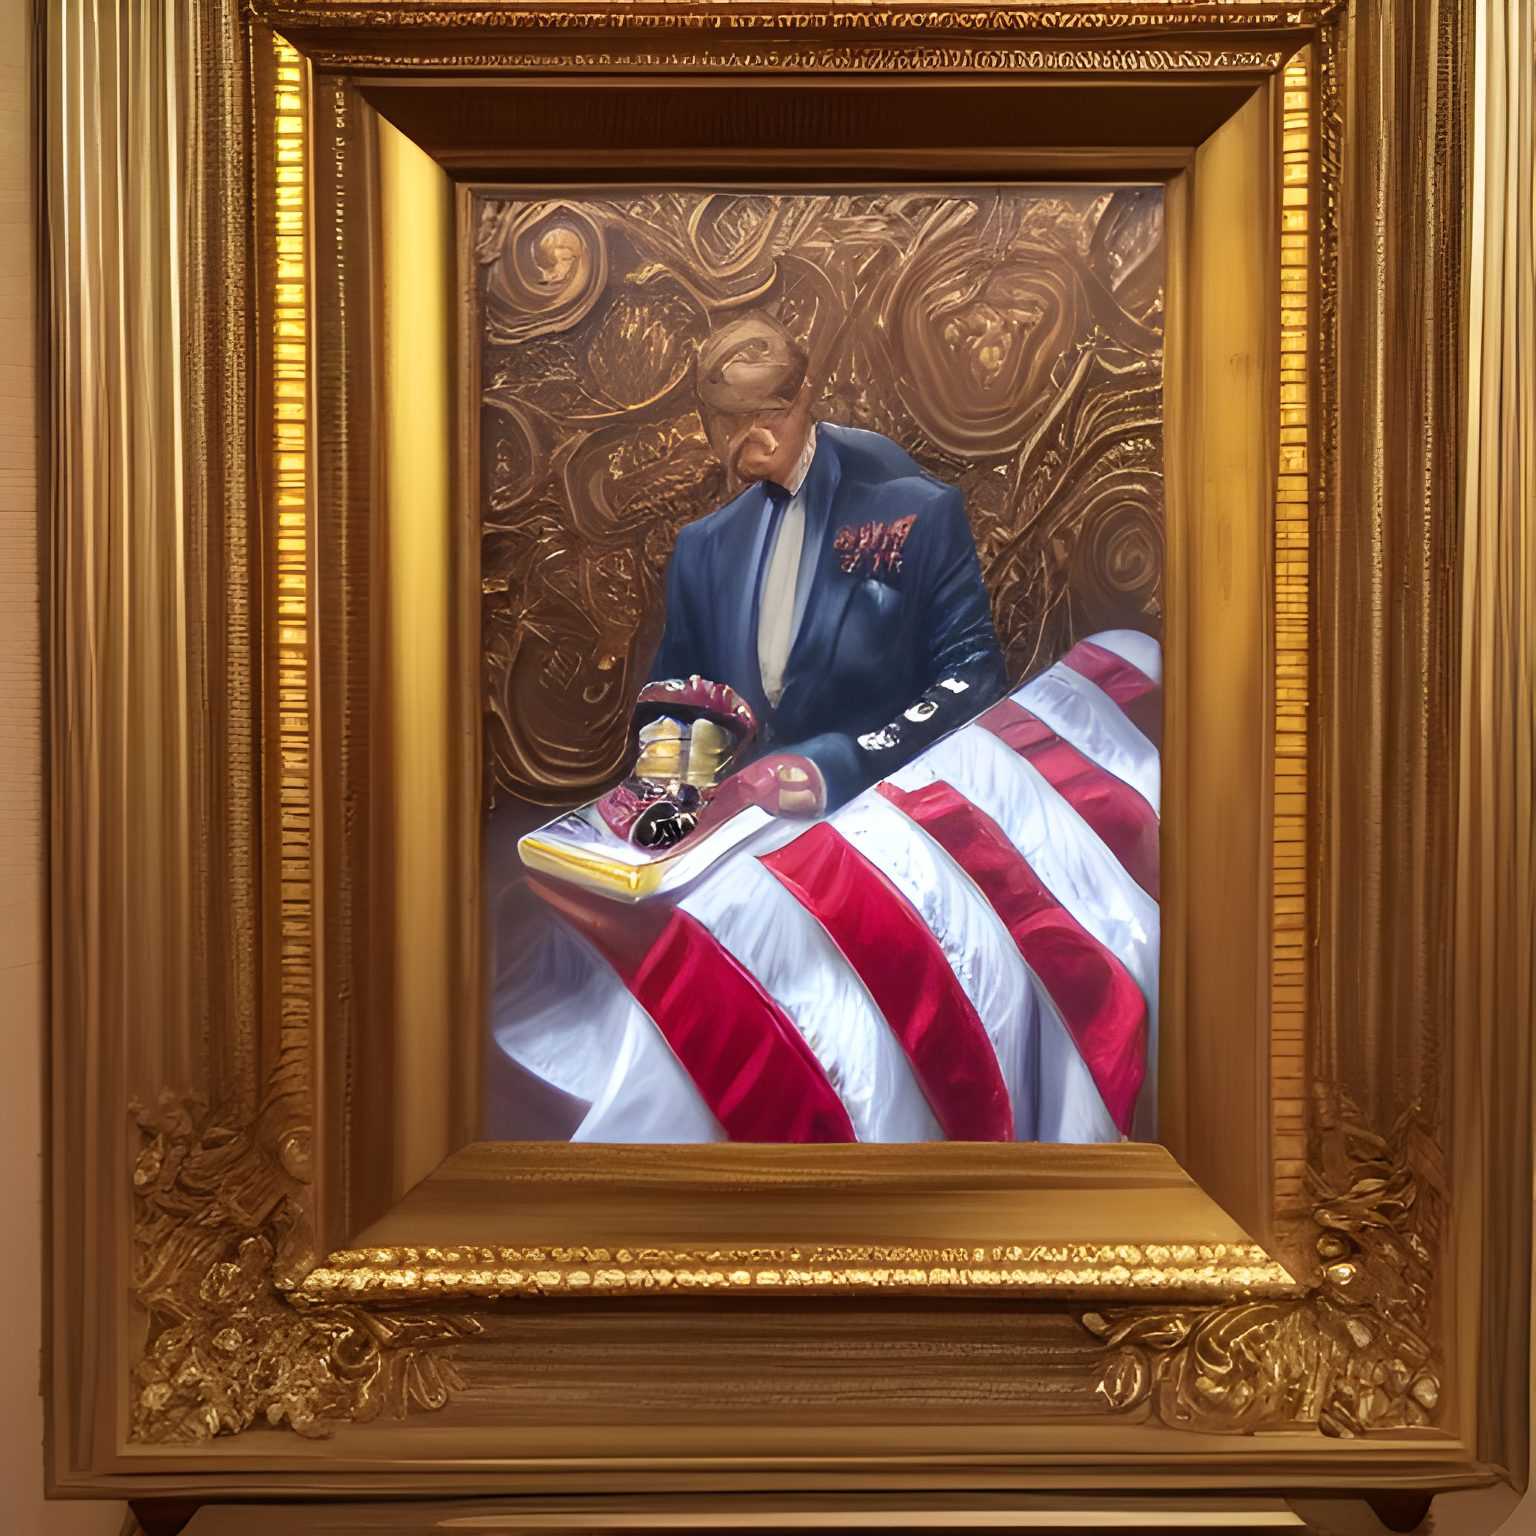 President oil painting, award winning, in a symbolic and meaningful style, insanely detailed and intricate, hypermaximalist, elegant, ornate, hyper realistic, super detailed